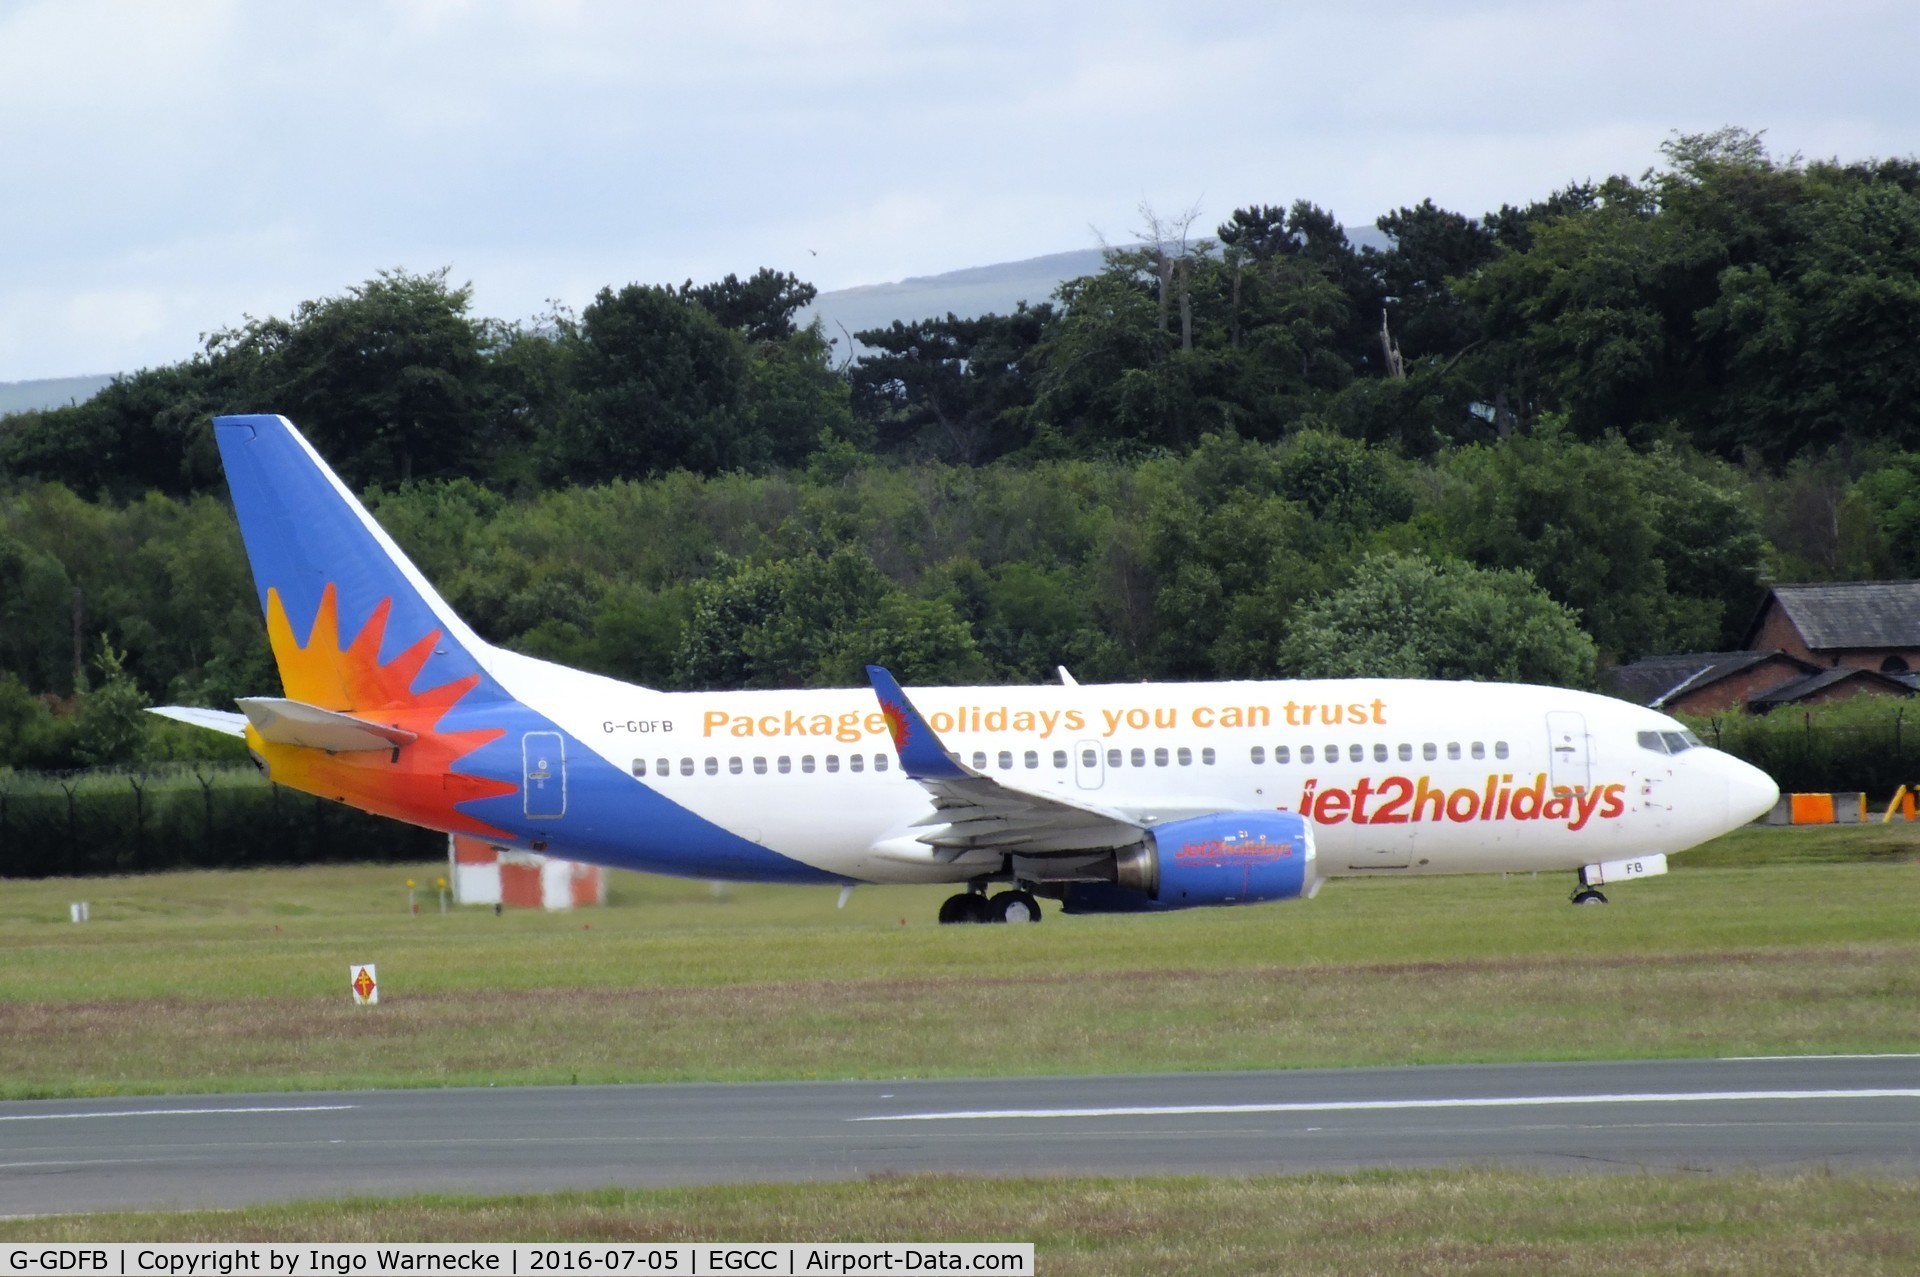 G-GDFB, 1992 Boeing 737-33A C/N 25743, Boeing 737-33A of jet2holidays at Manchester airport